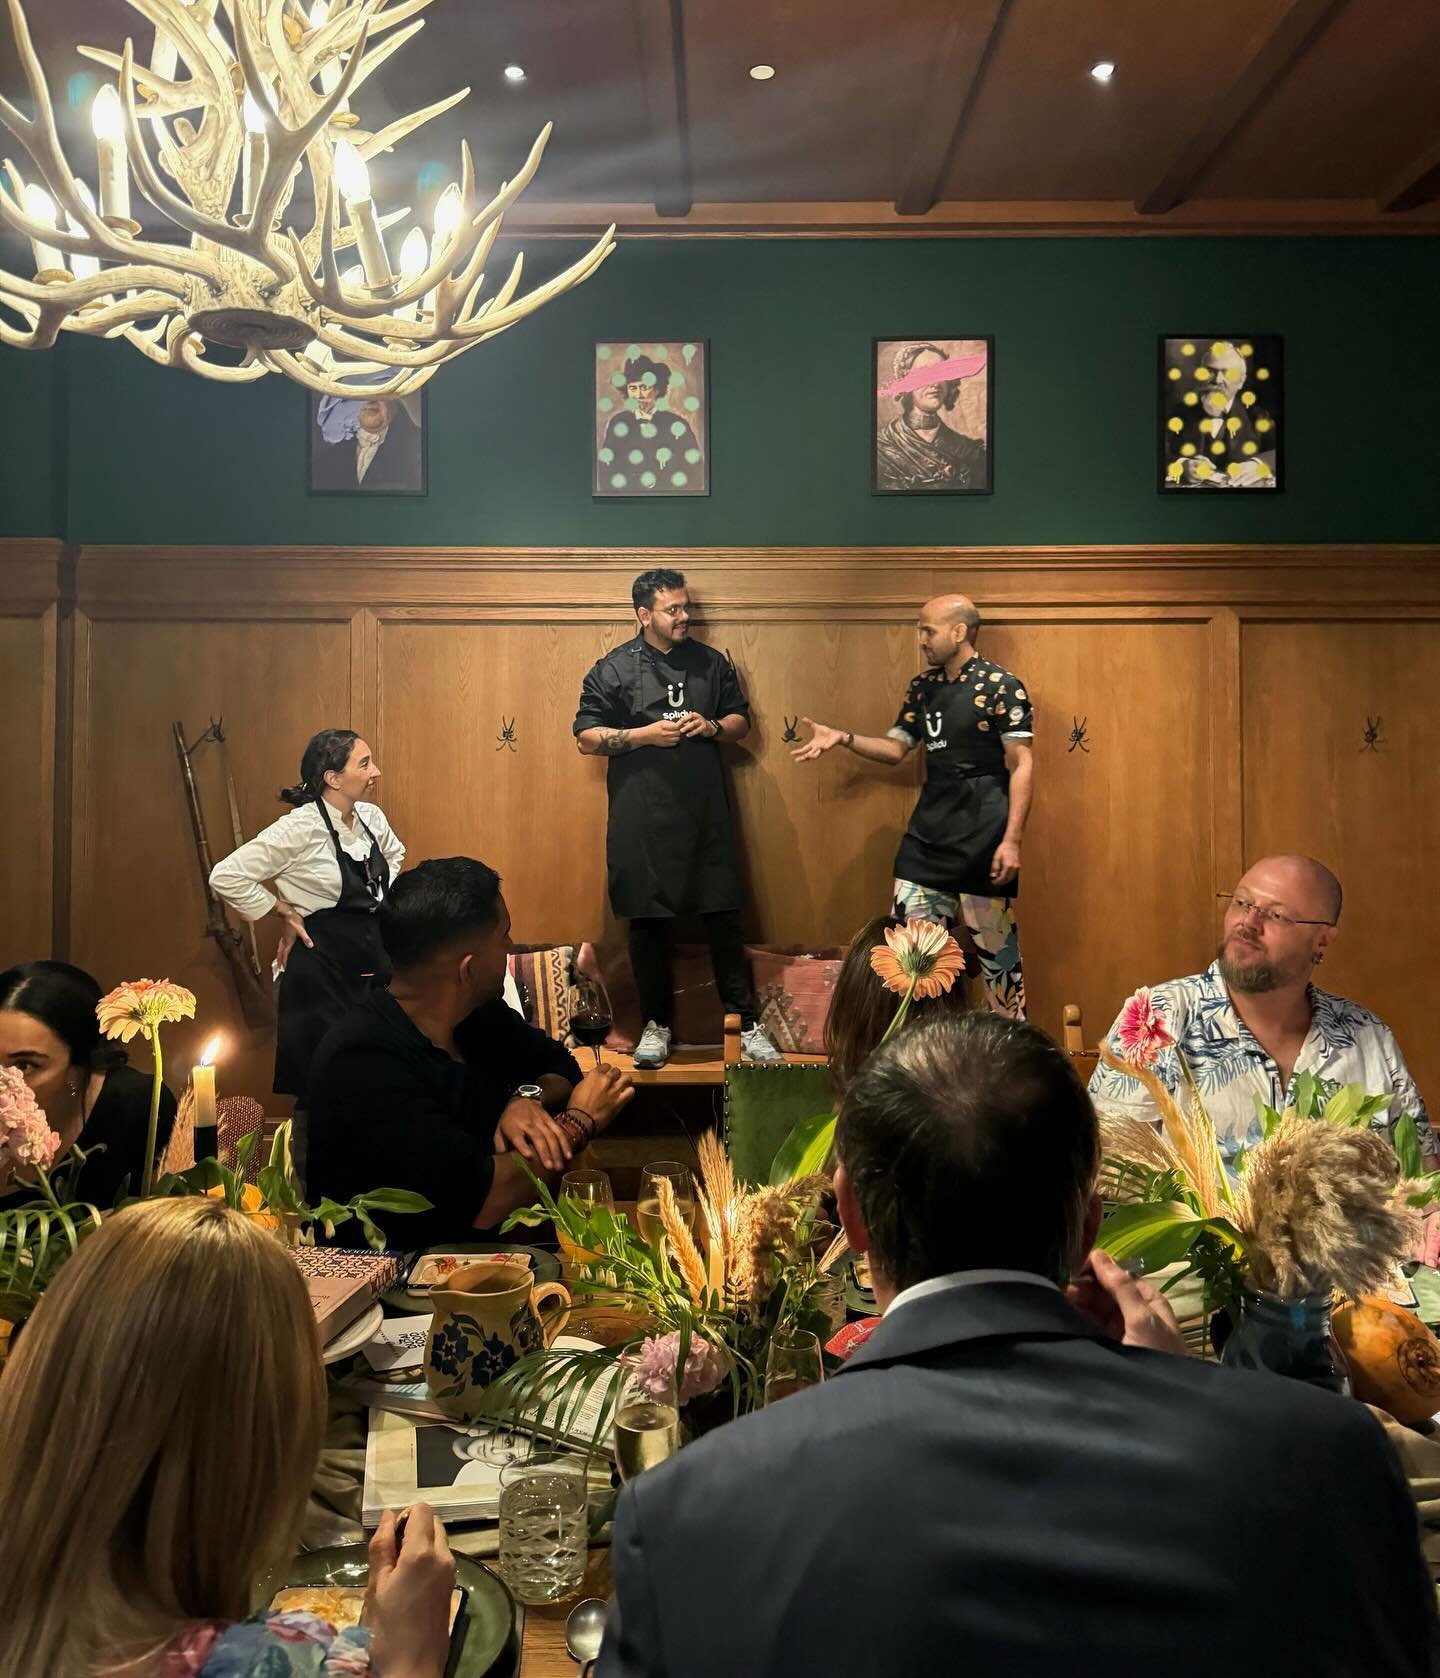 Transported to the heart of South America with six hands at the helm! 🌎✨ Chef Kuv, Andrea, and Esteban wowed us all with their culinary wizardry at this incredible 6-course dinner. Starting with a lively plant-forward ceviche and progressing through